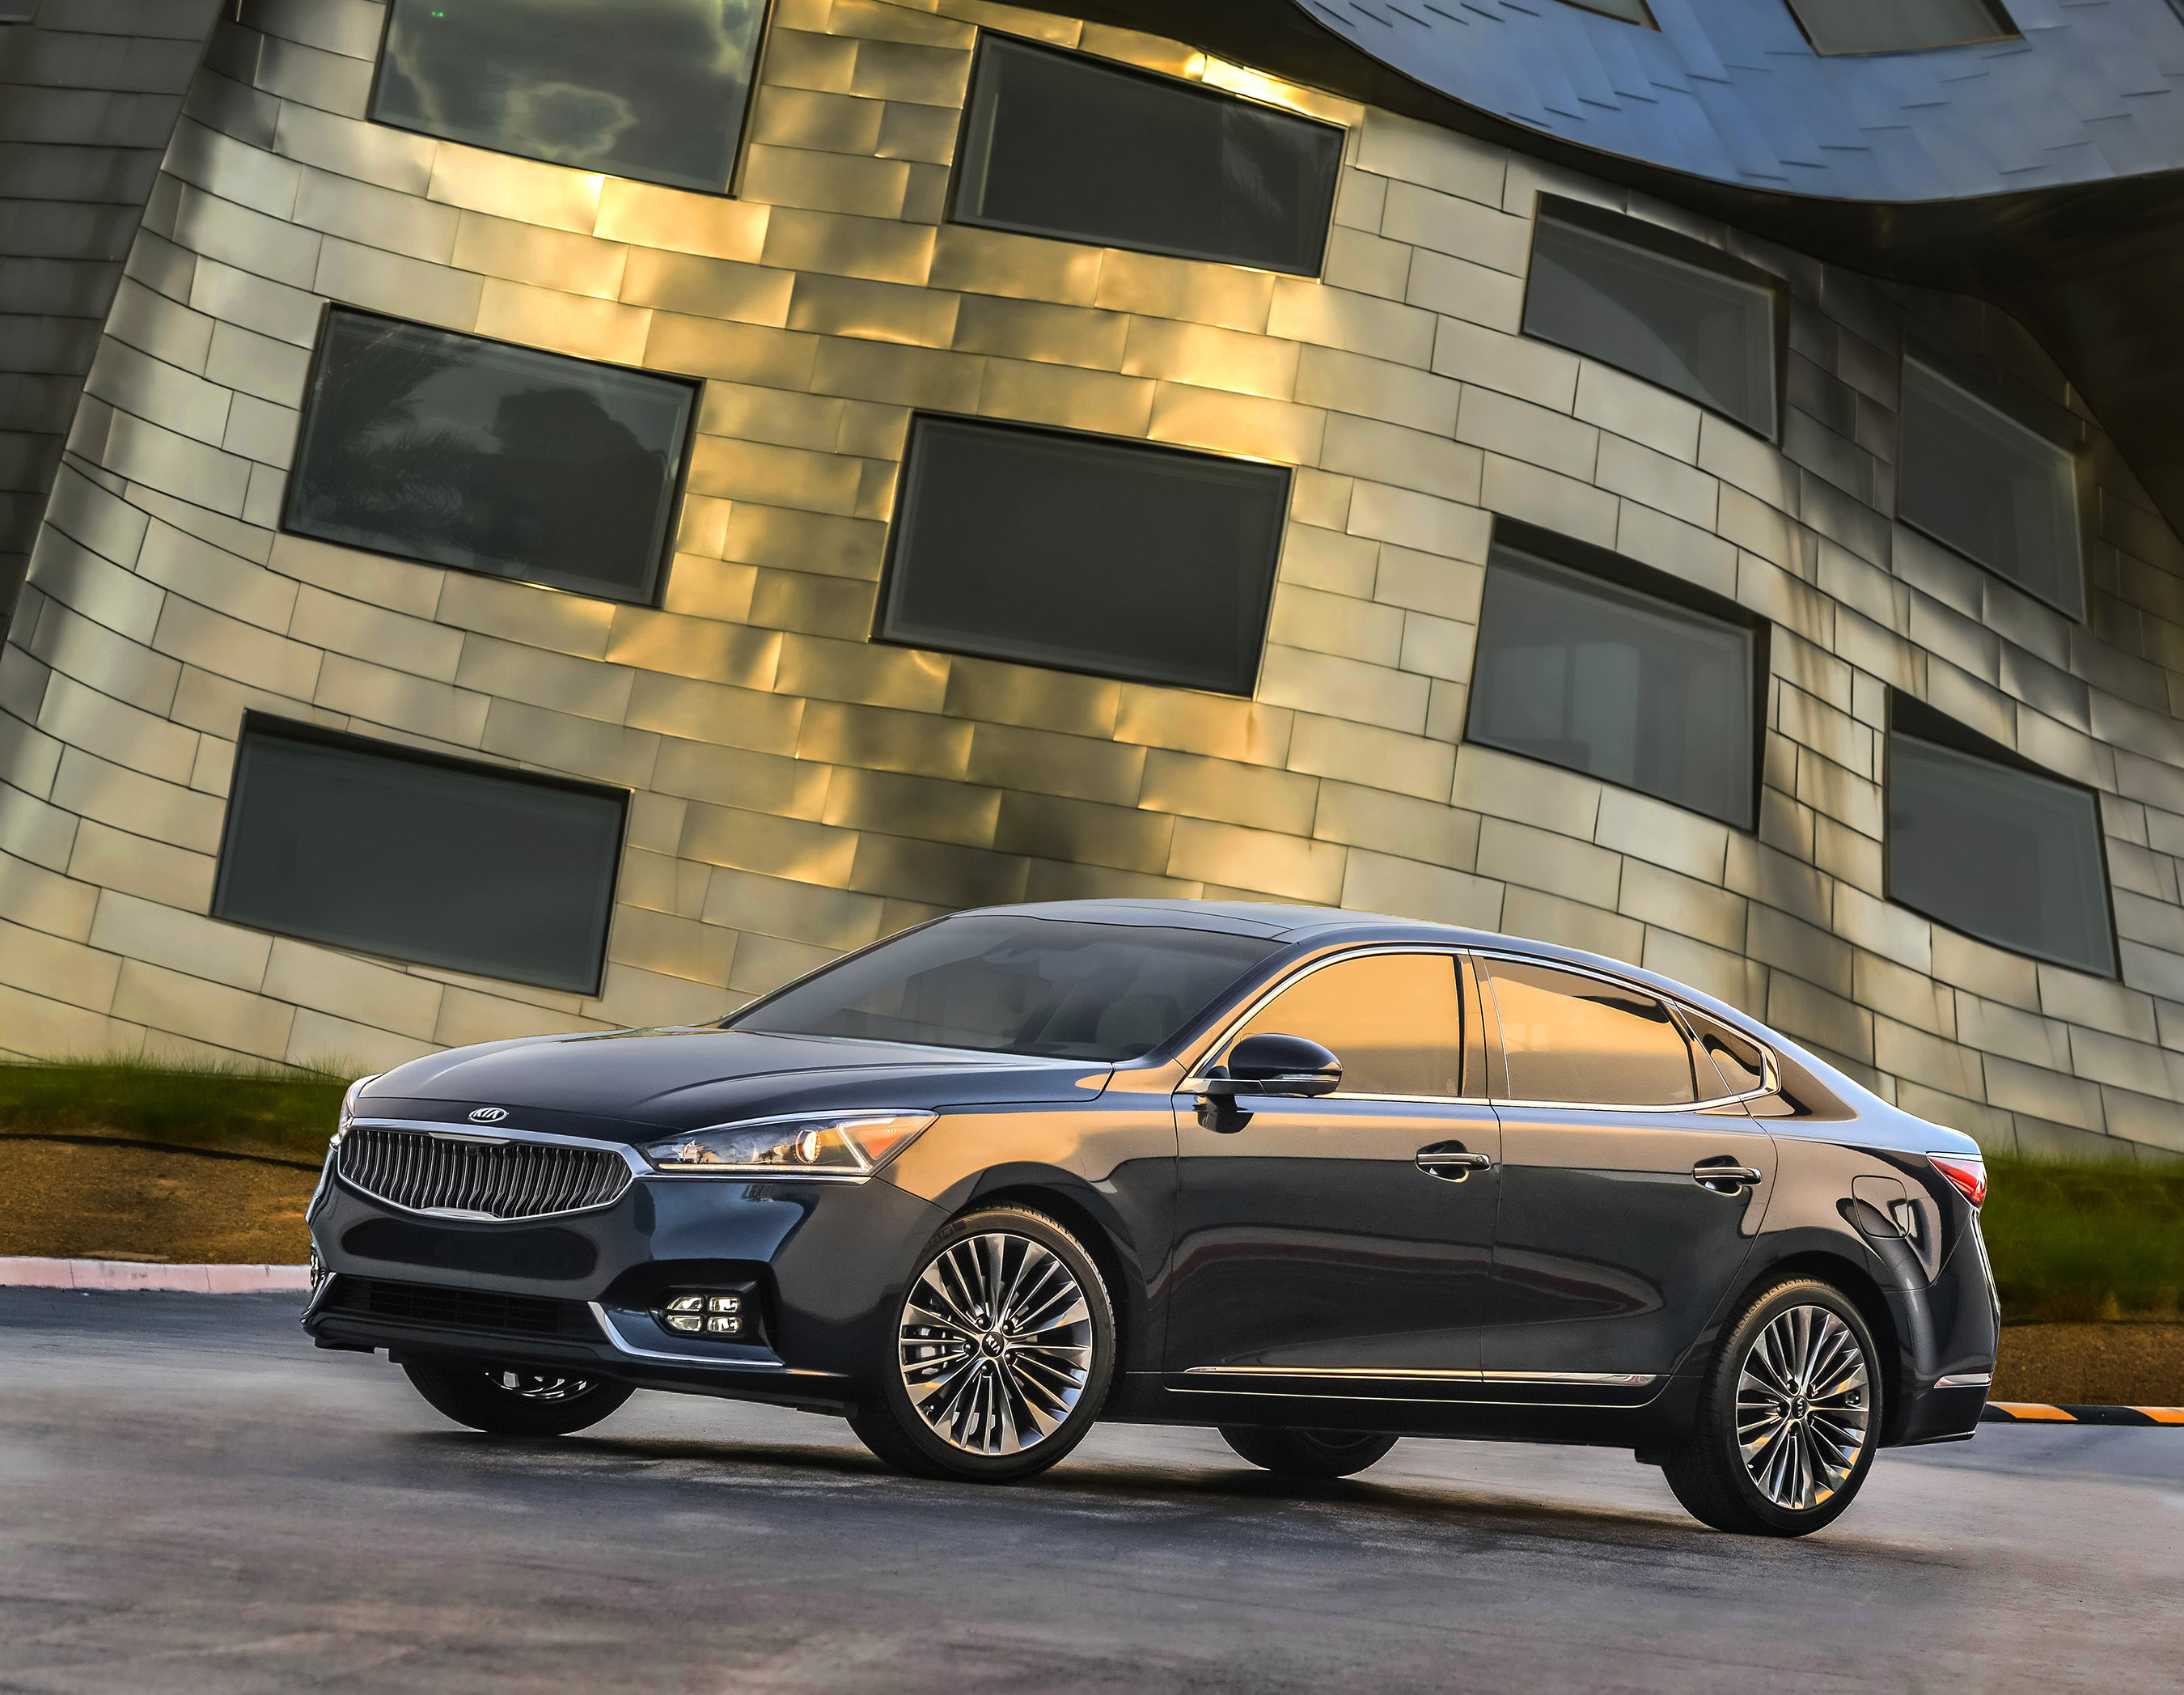 Designed at Kia’s California design studio, the all-new 2017 Cadenza boasts luxury refinements with expressive styling, advanced technology, and refined powertrain.